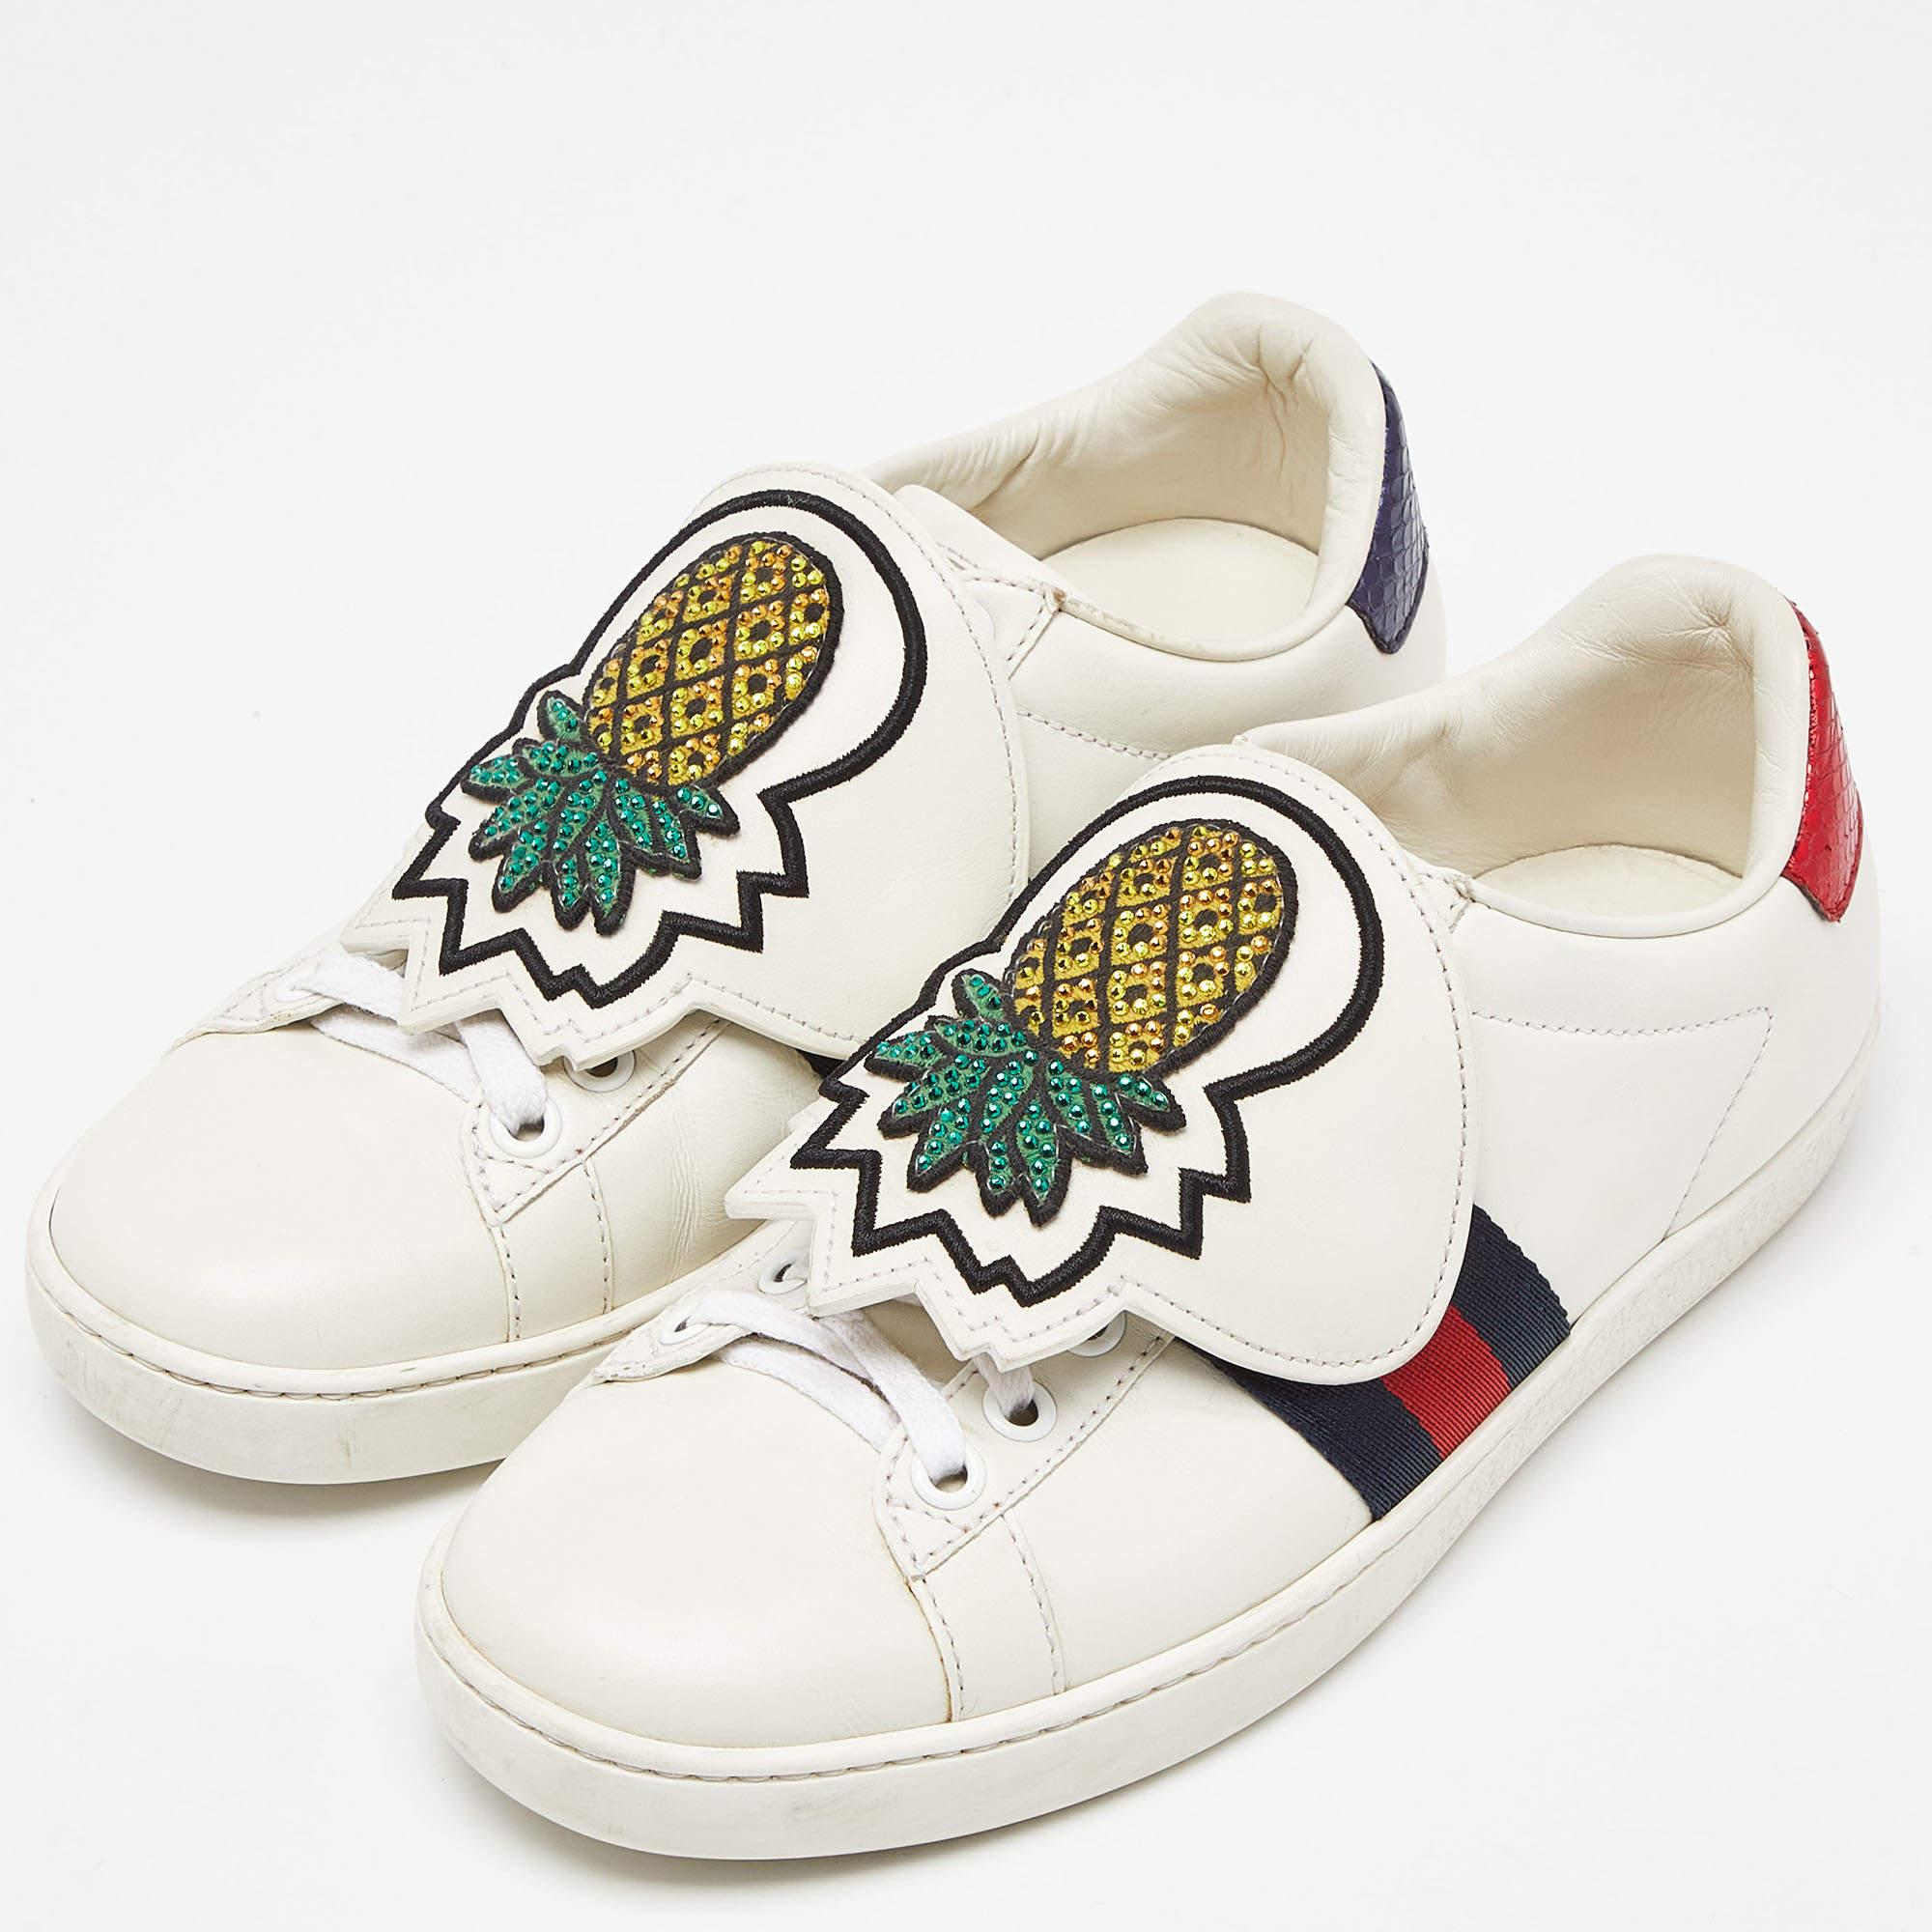 Women's Gucci White Leather Embellished Pineapple Strap Ace Sneakers Size 35 For Sale